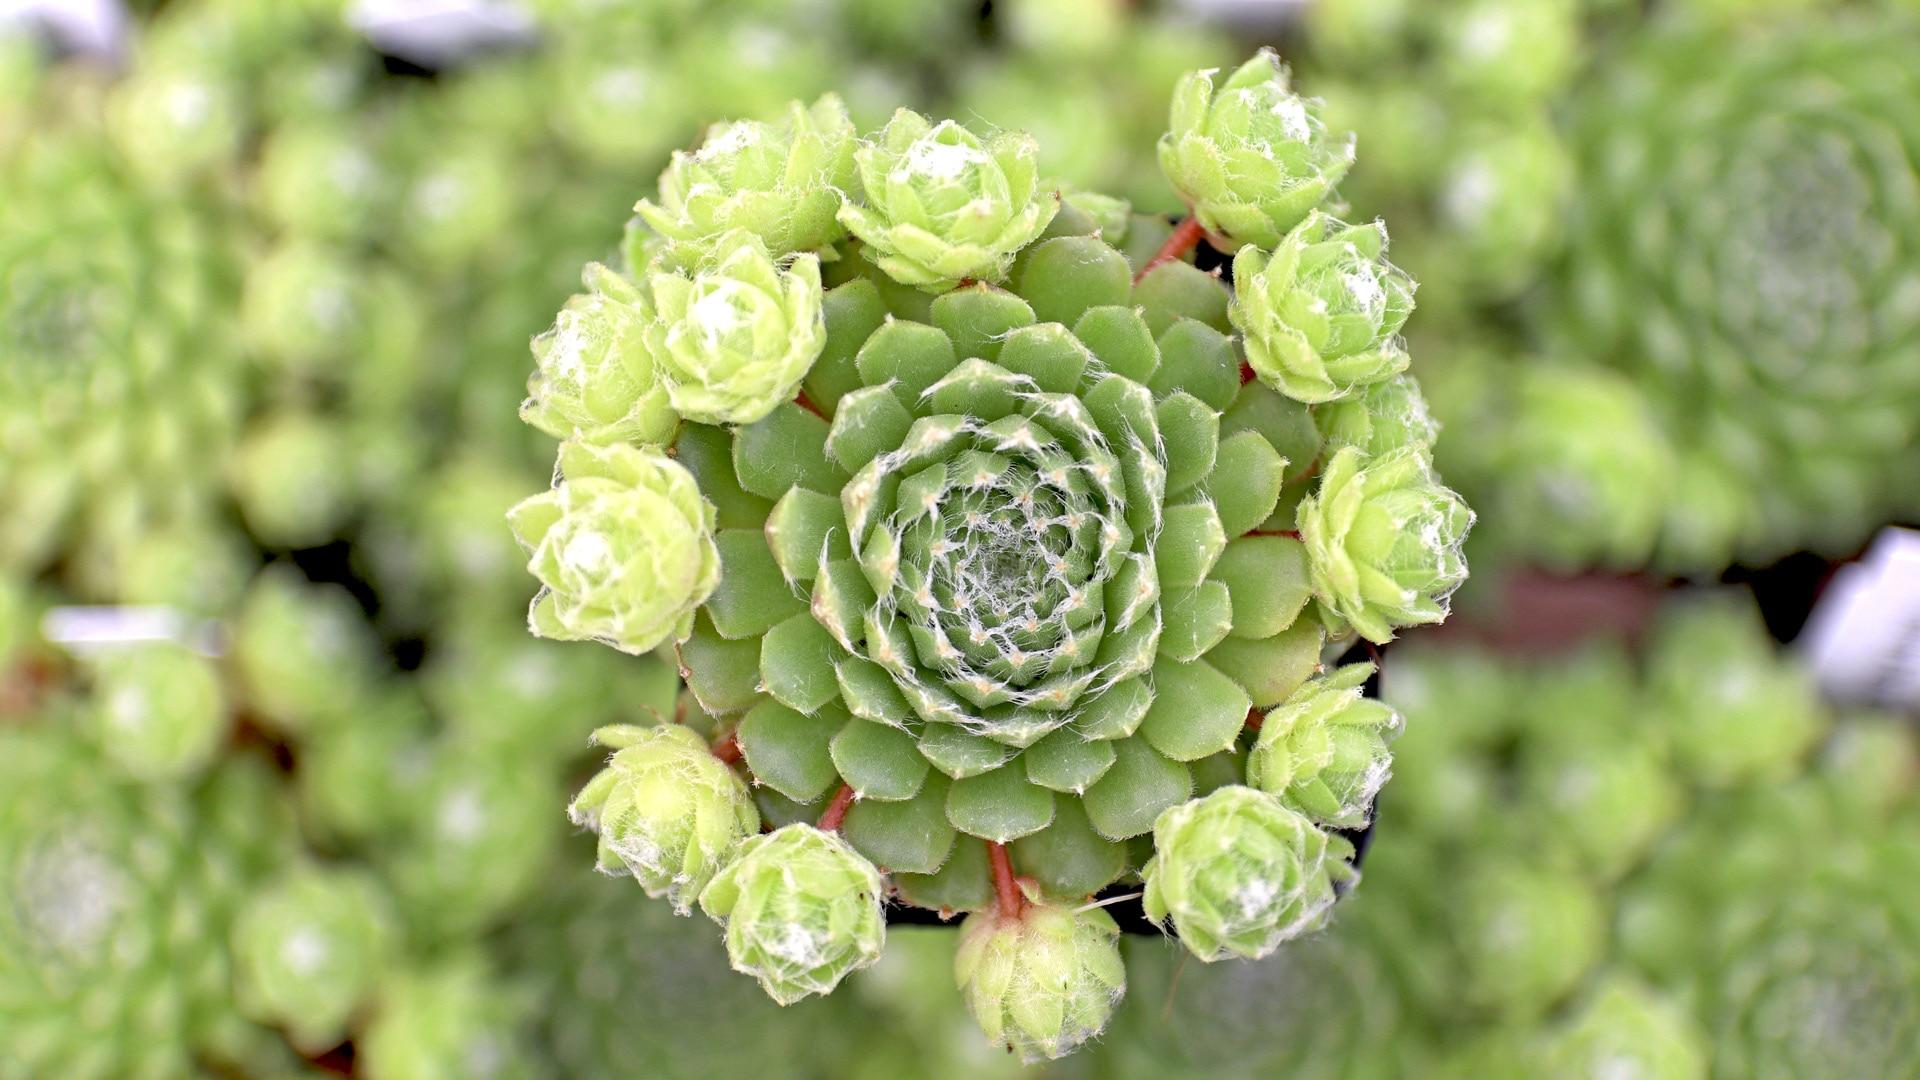 The Most Prolific Sempervivum (Hens and Chicks) and Heuffelii